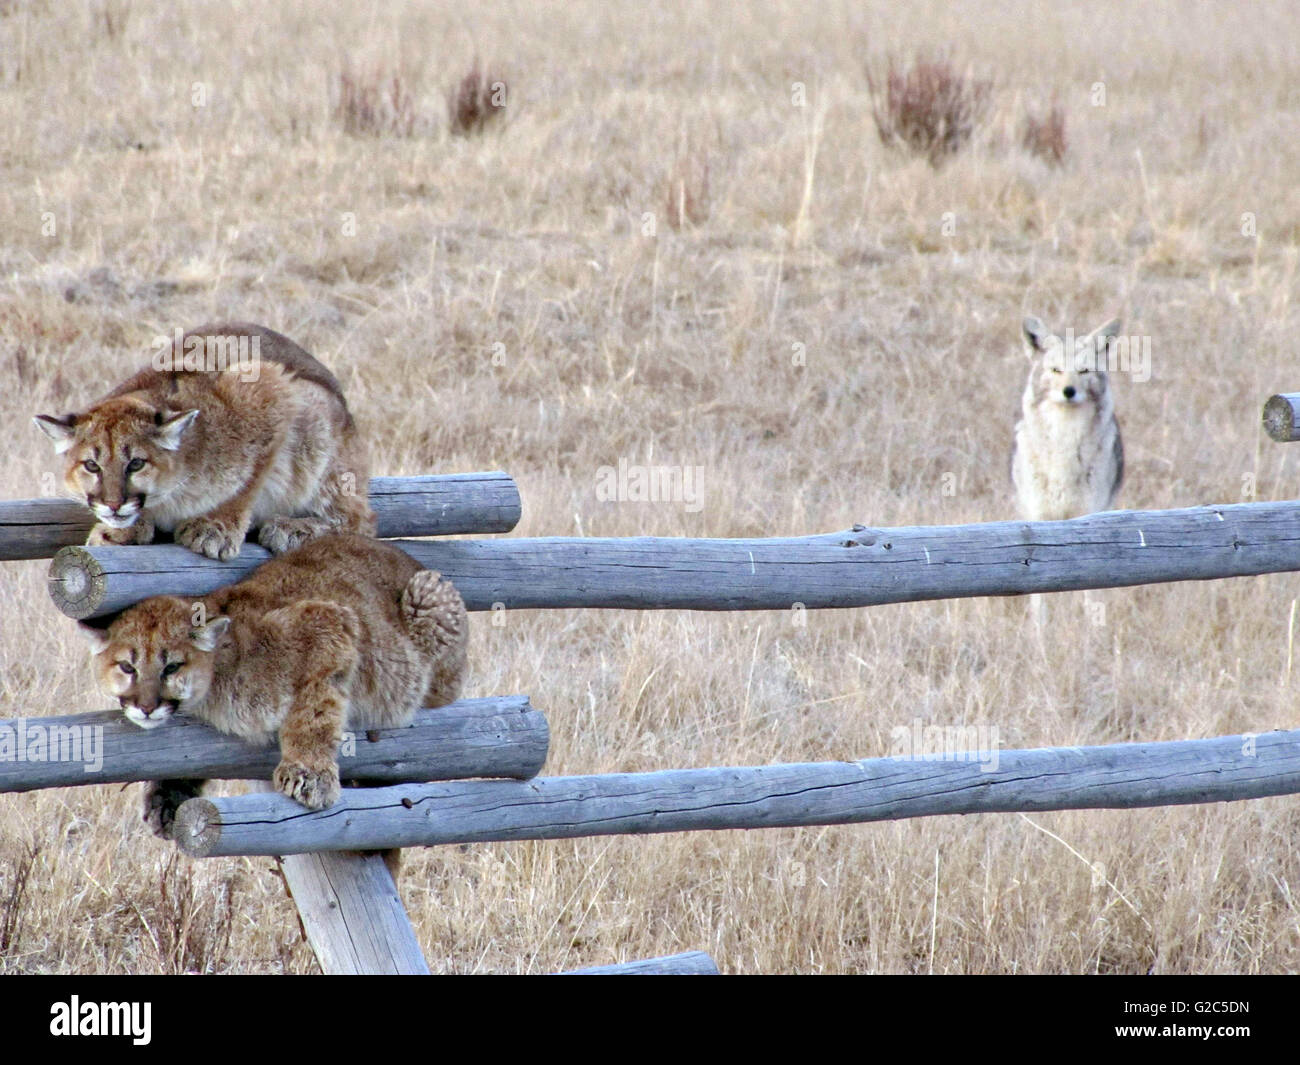 Two juvenile mountain lion cubs cling to a rail fence after being chased by a pack of angry coyotes at the National Elk Refuge March 28, 2013 in Kelly, Wyoming. The coyotes circled the cats for an hour before letting the cubs escape. Park rangers sighted the cubs safely with their mother the following day. Stock Photo